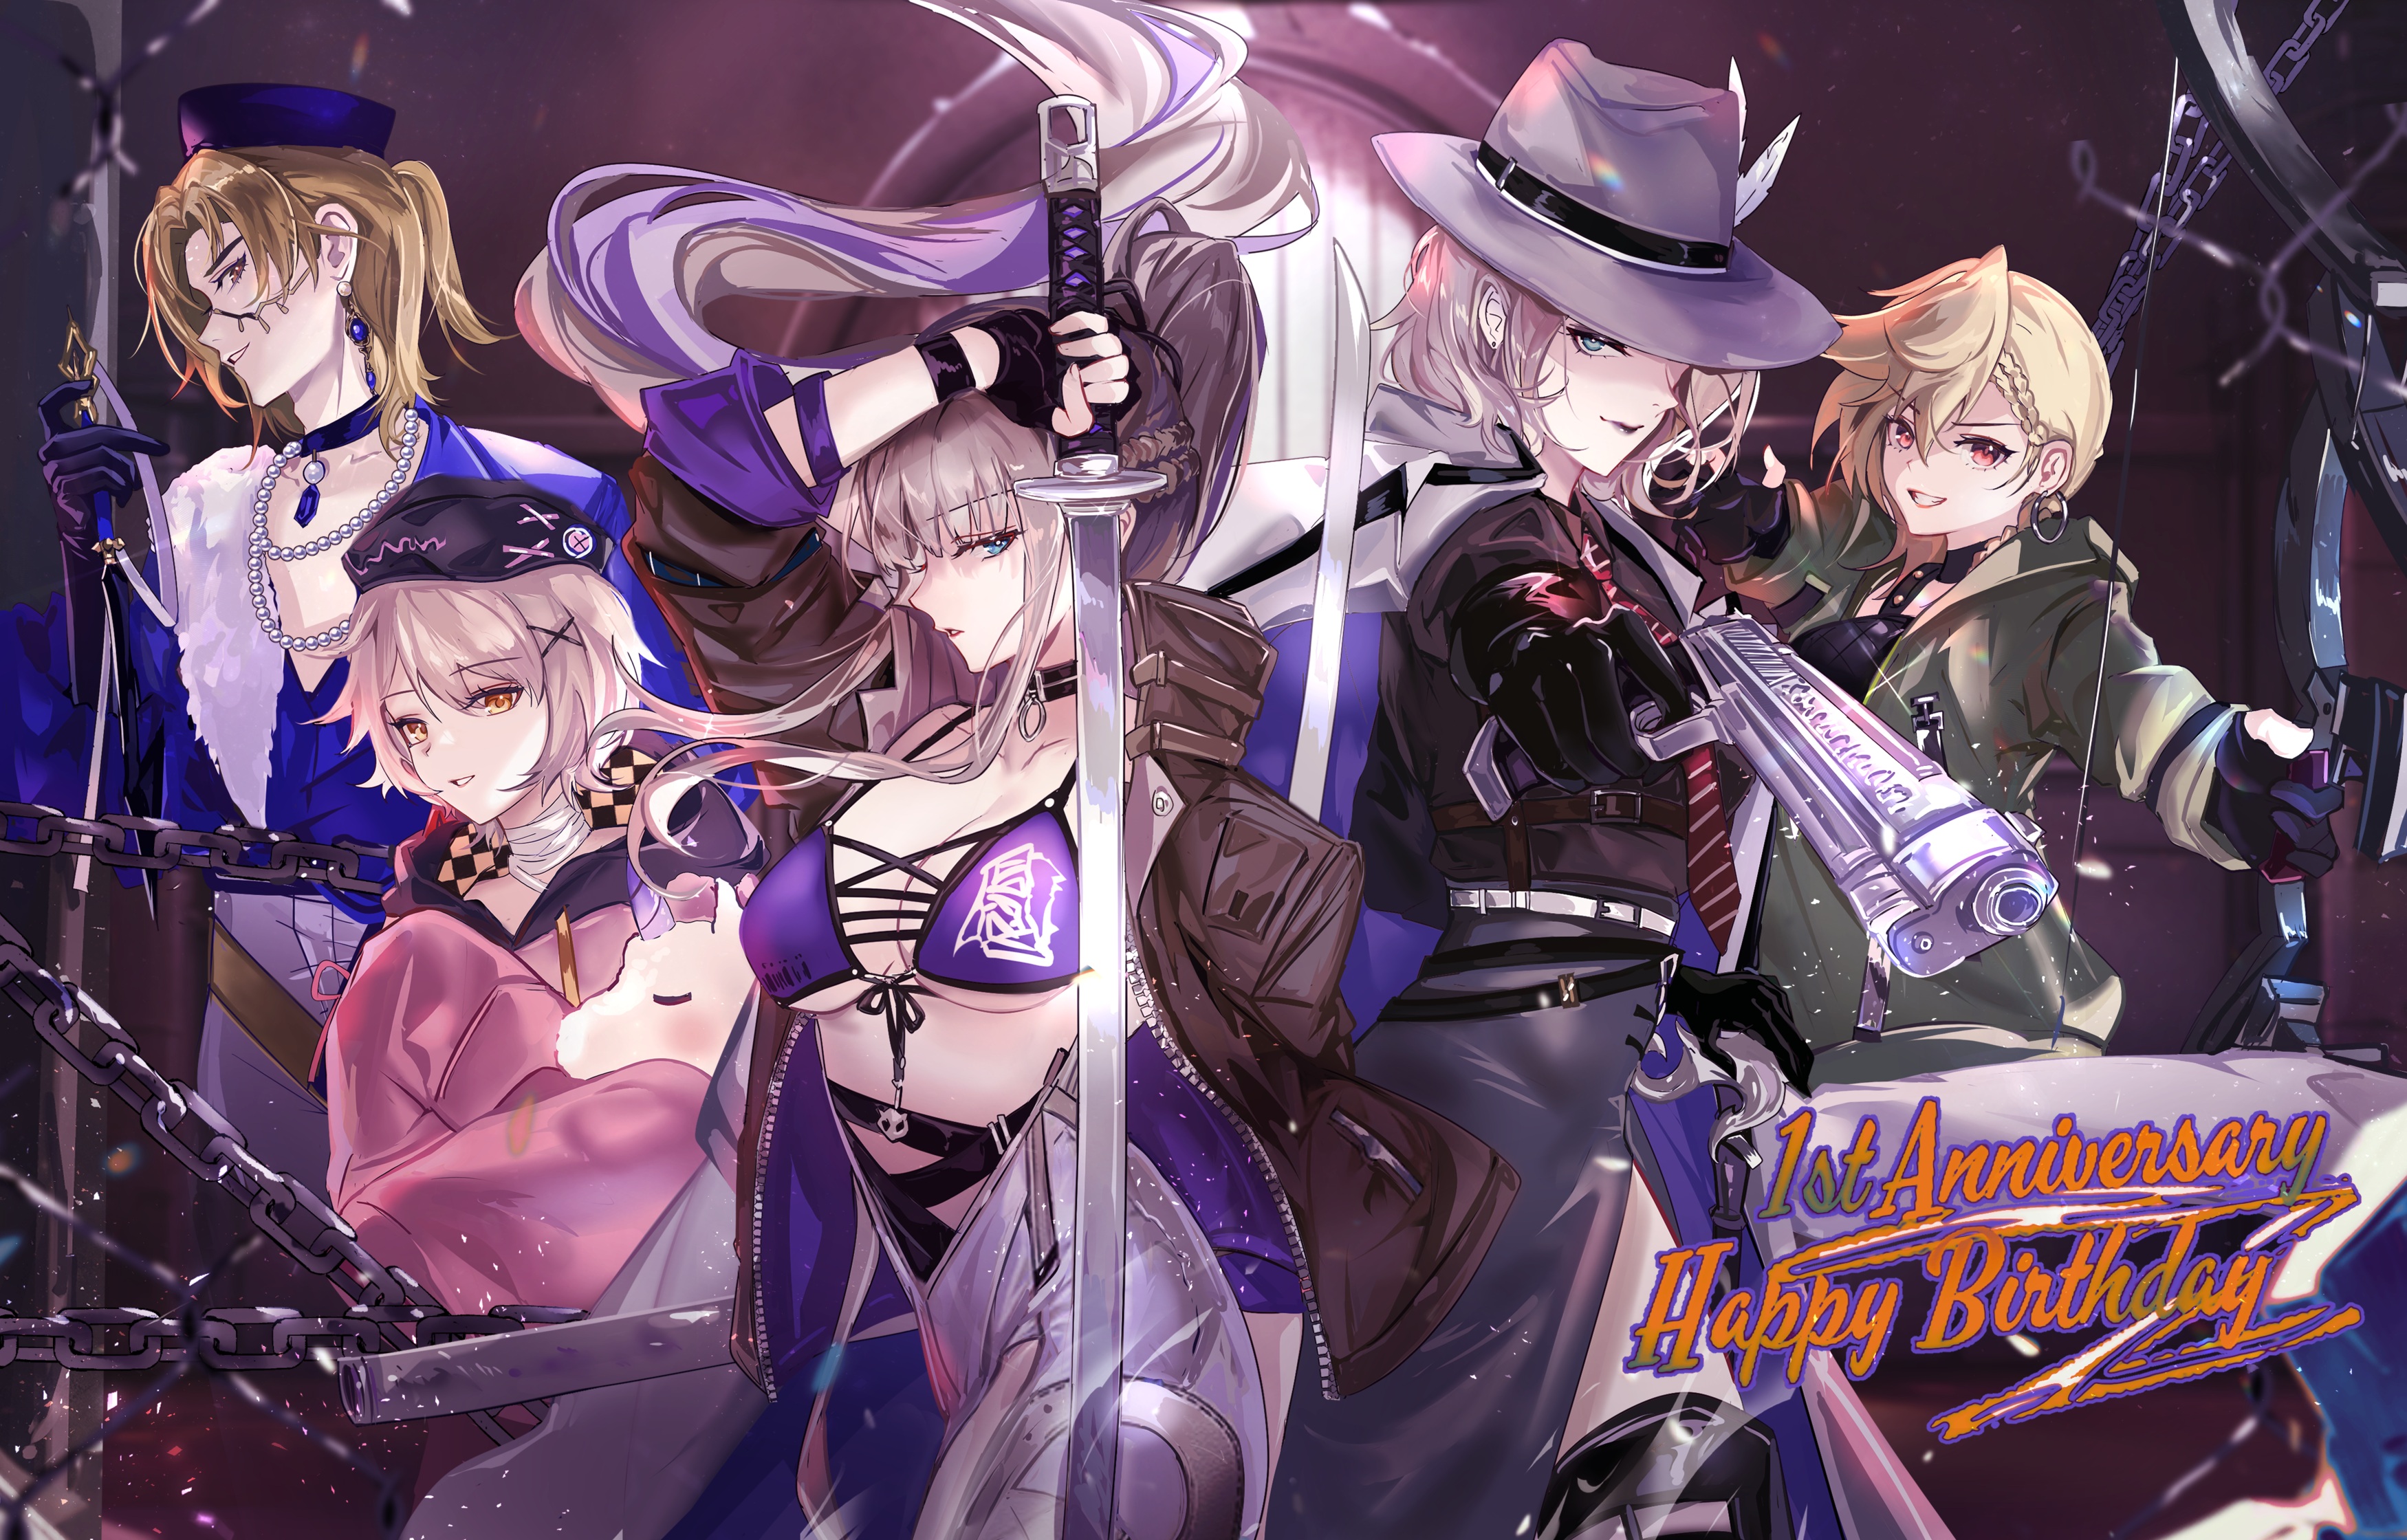 Anime 3500x2240 anime anime girls gun anime girls with guns bow chains gloves fingerless gloves smiling anniversary hat looking at viewer cleavage big boobs earring sword weapon choker long hair